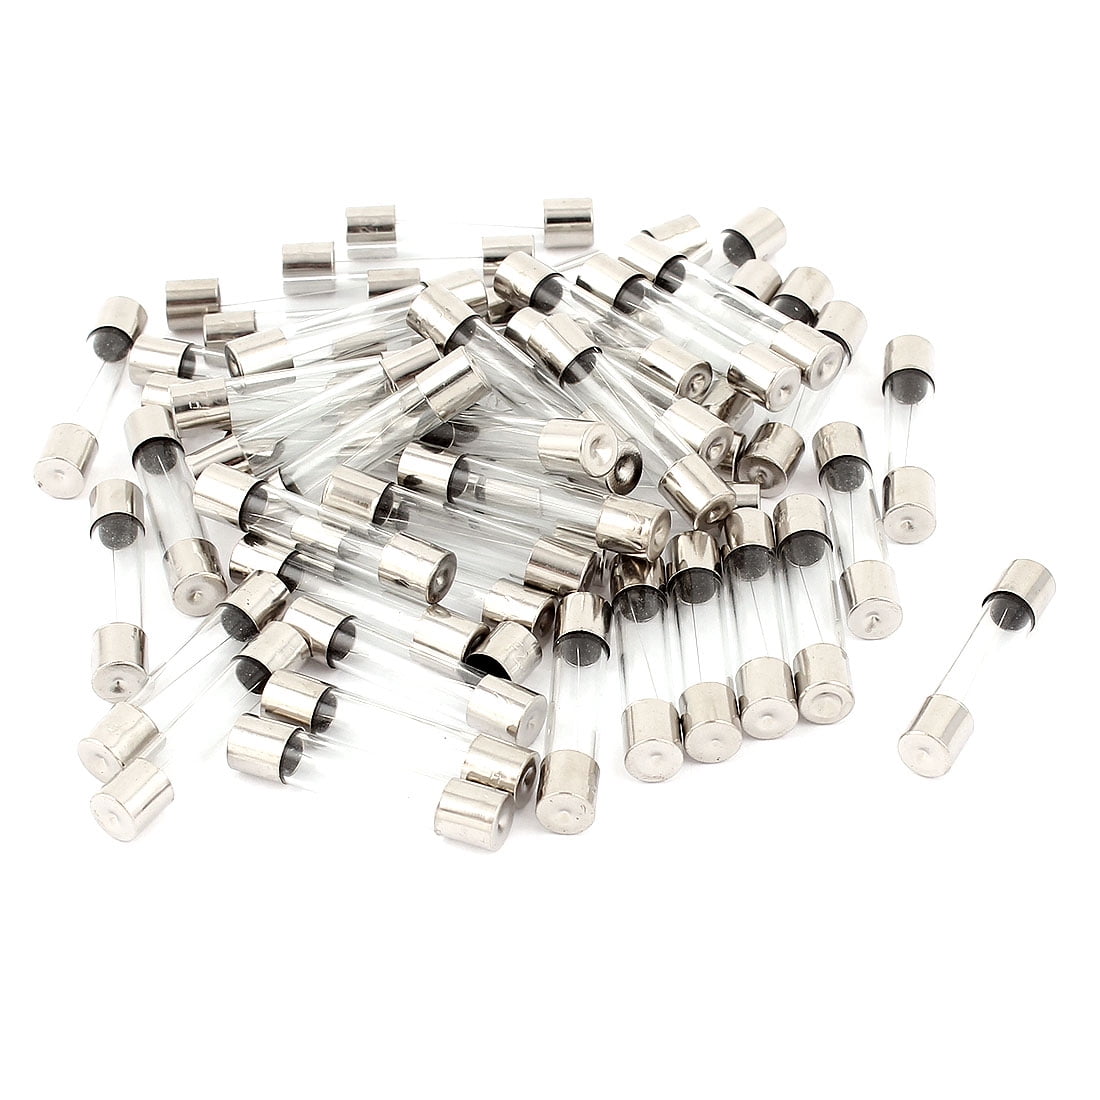 20MMx5MM FAST BLOW GLASS FUSES PACK OF 10 F5AL250V 5AMP 20MMX5MM USA FAST 